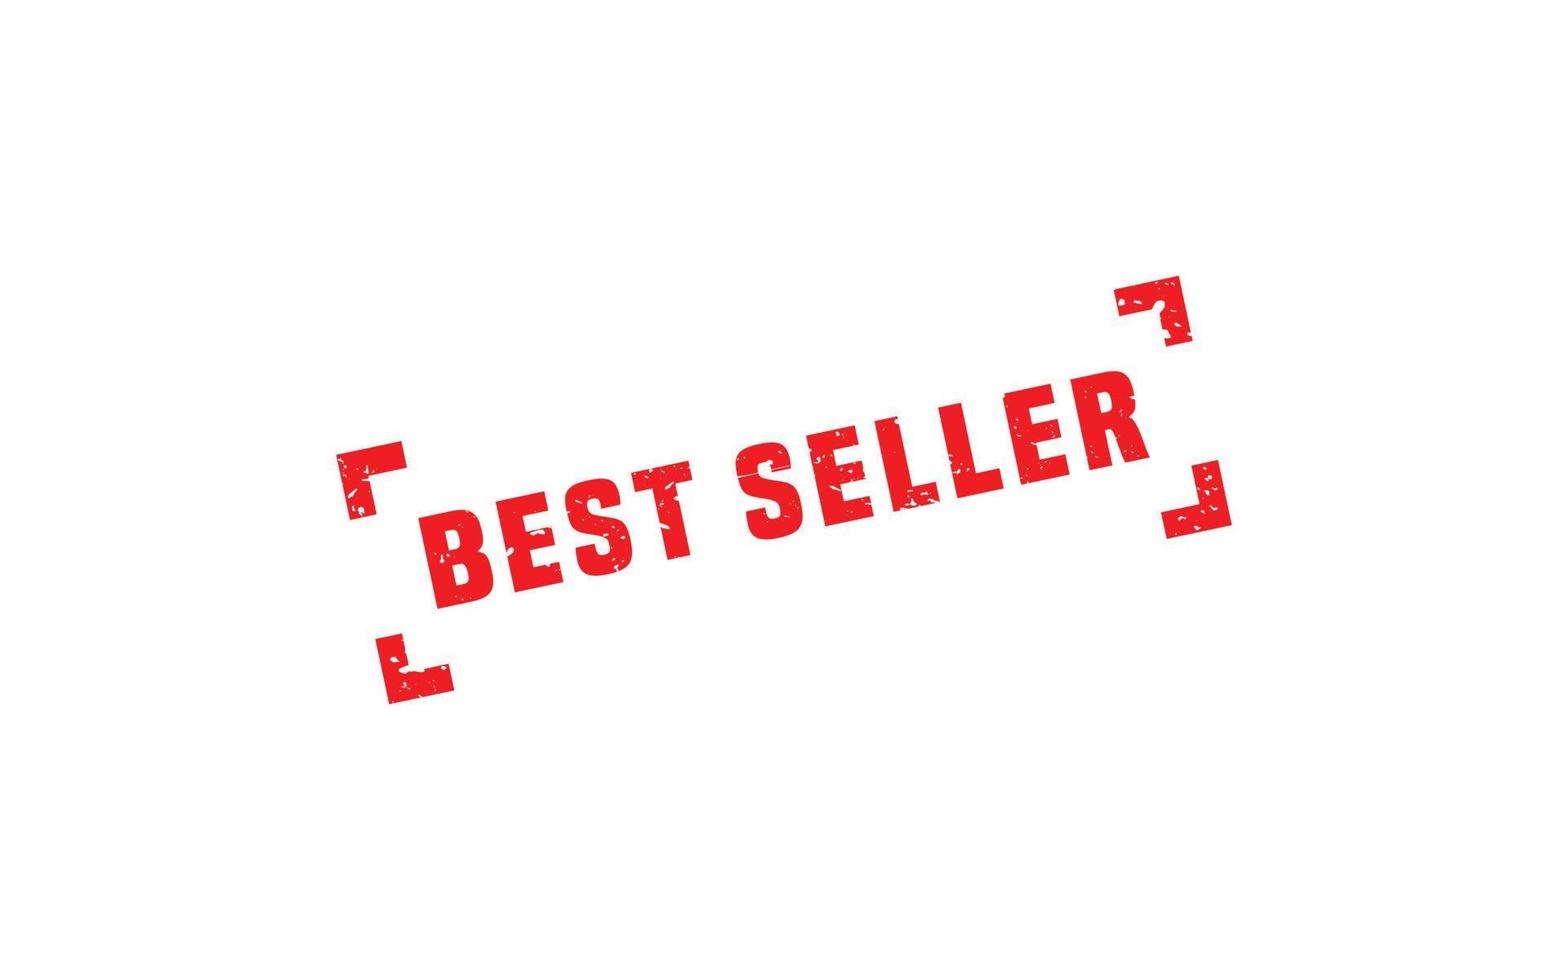 BEST SELLER rubber stamp with grunge style on white background vector